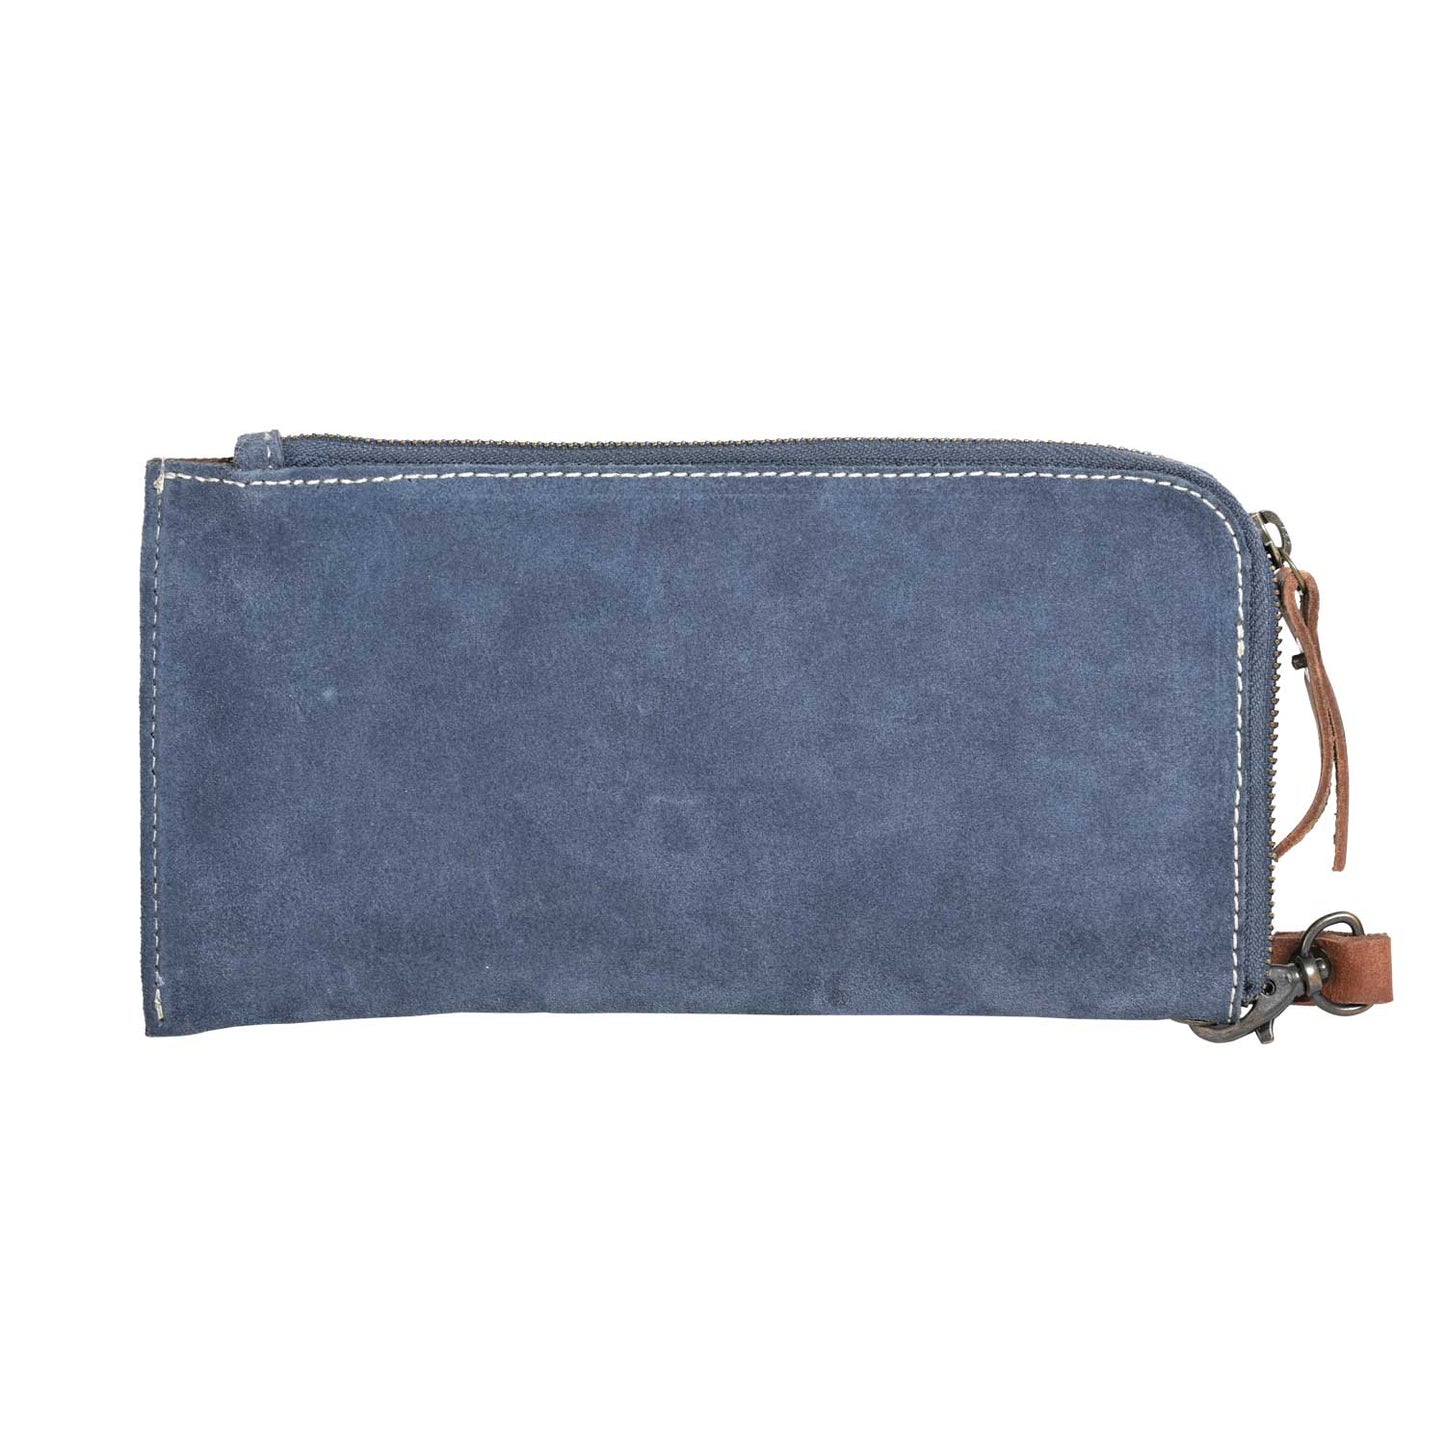 Load image into Gallery viewer, Bandana Leather Clutch by STS
